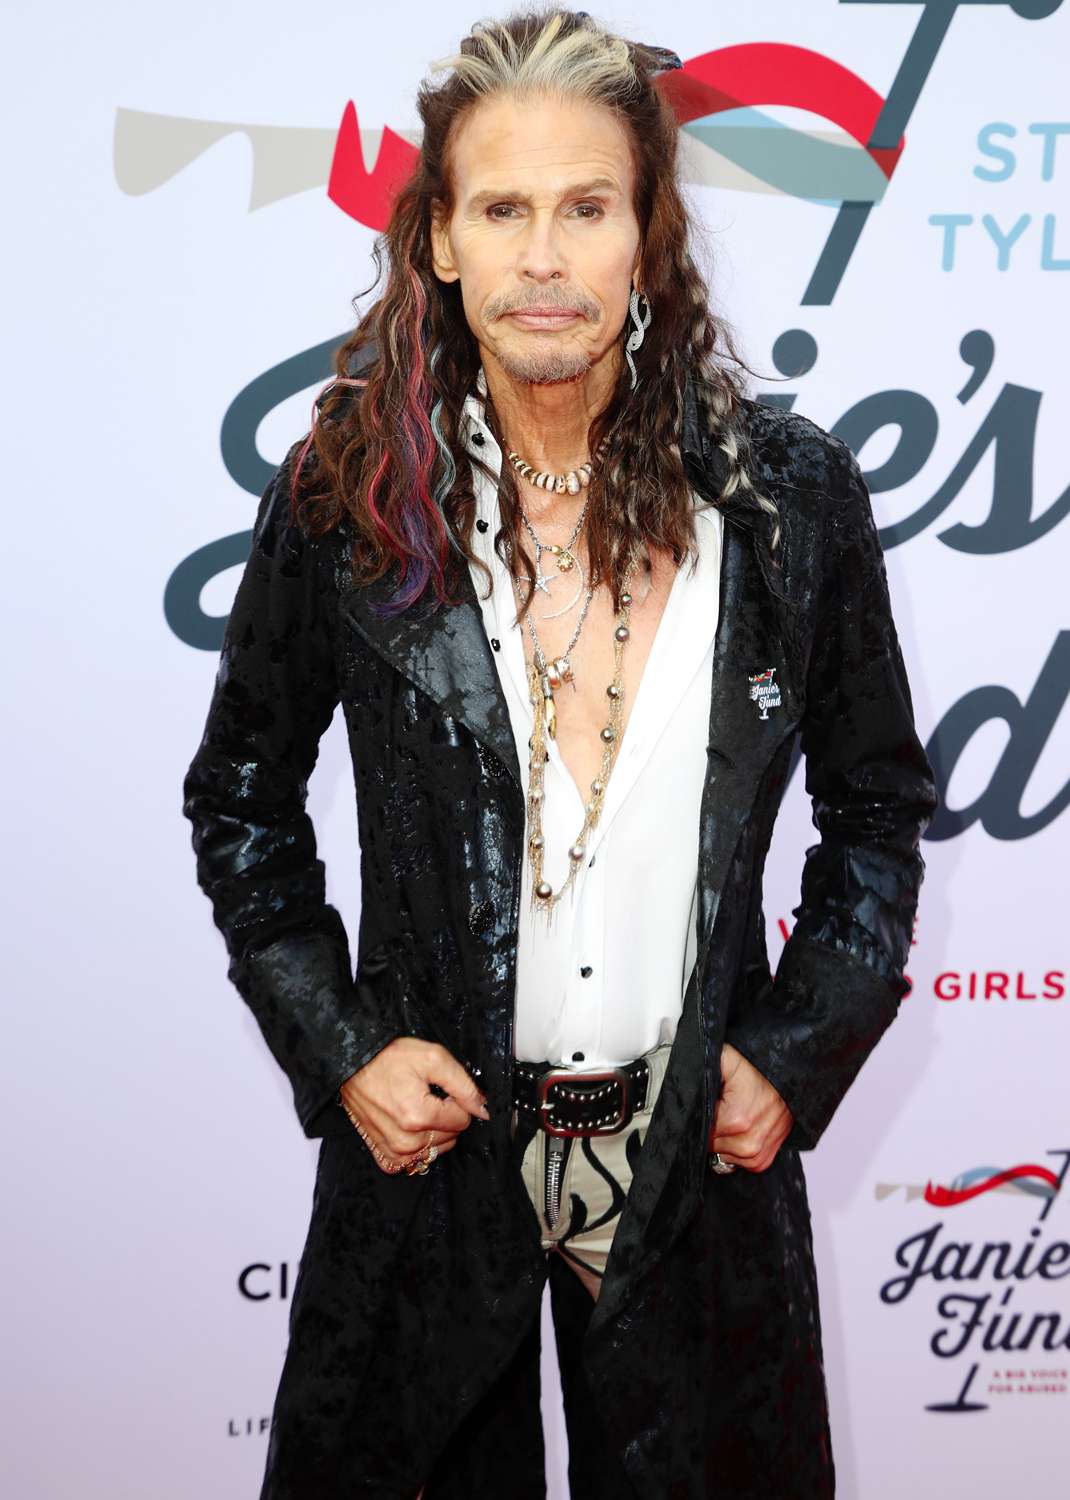 Steven Tyler attends Steven Tyler's 4th Annual GRAMMY Awards® Viewing Party benefitting Janie's Fund presented by Live Nation at Hollywood Palladium on April 03, 2022 in Los Angeles, California.